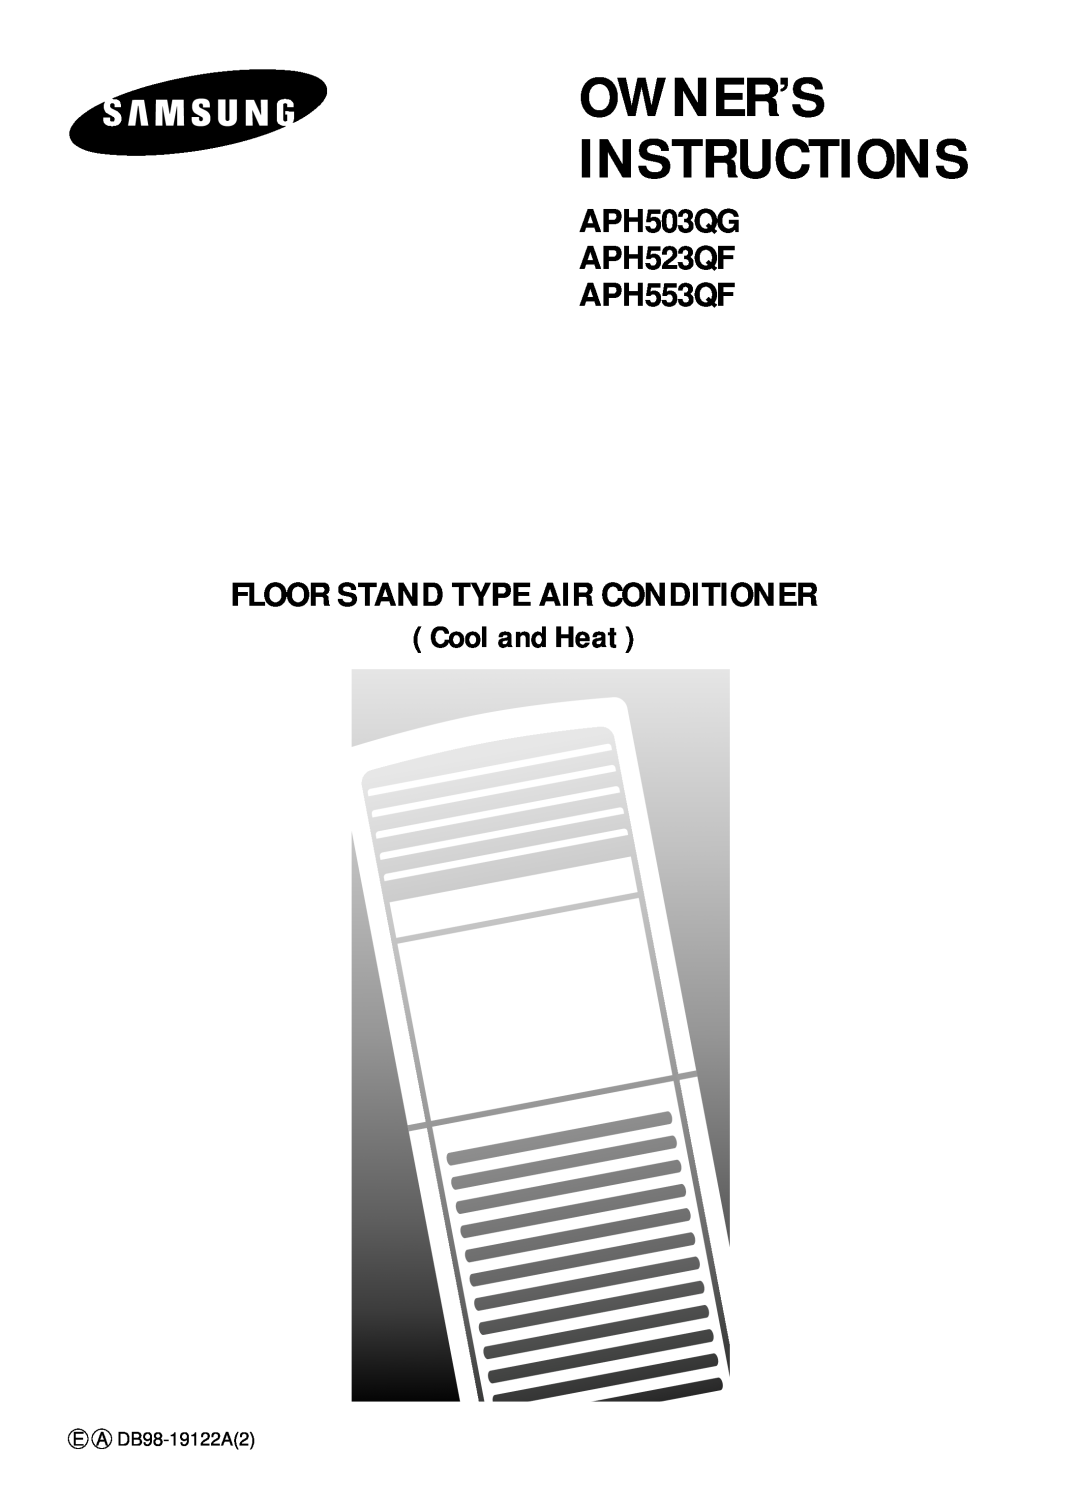 Samsung APH503QG/XSG manual Owner’S Instructions, APH503QG APH523QF APH553QF FLOOR STAND TYPE AIR CONDITIONER 